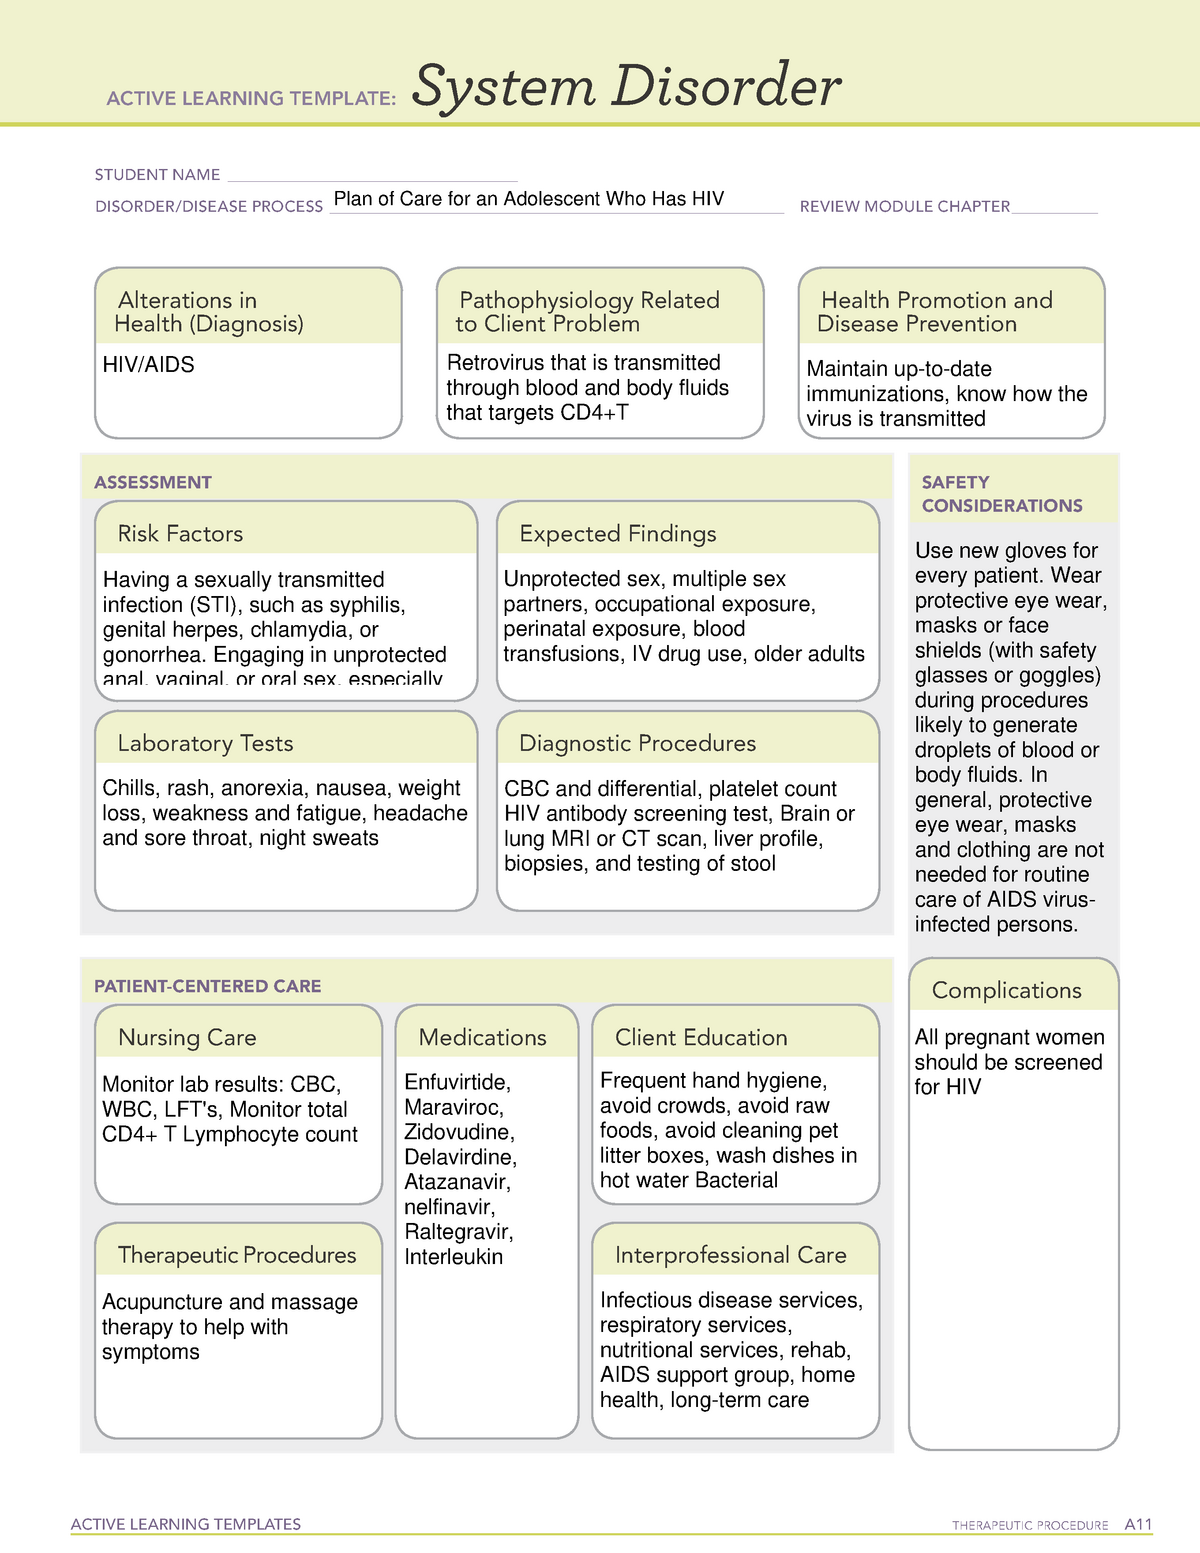 HIV System Disorder Cms template for peds ACTIVE LEARNING TEMPLATES